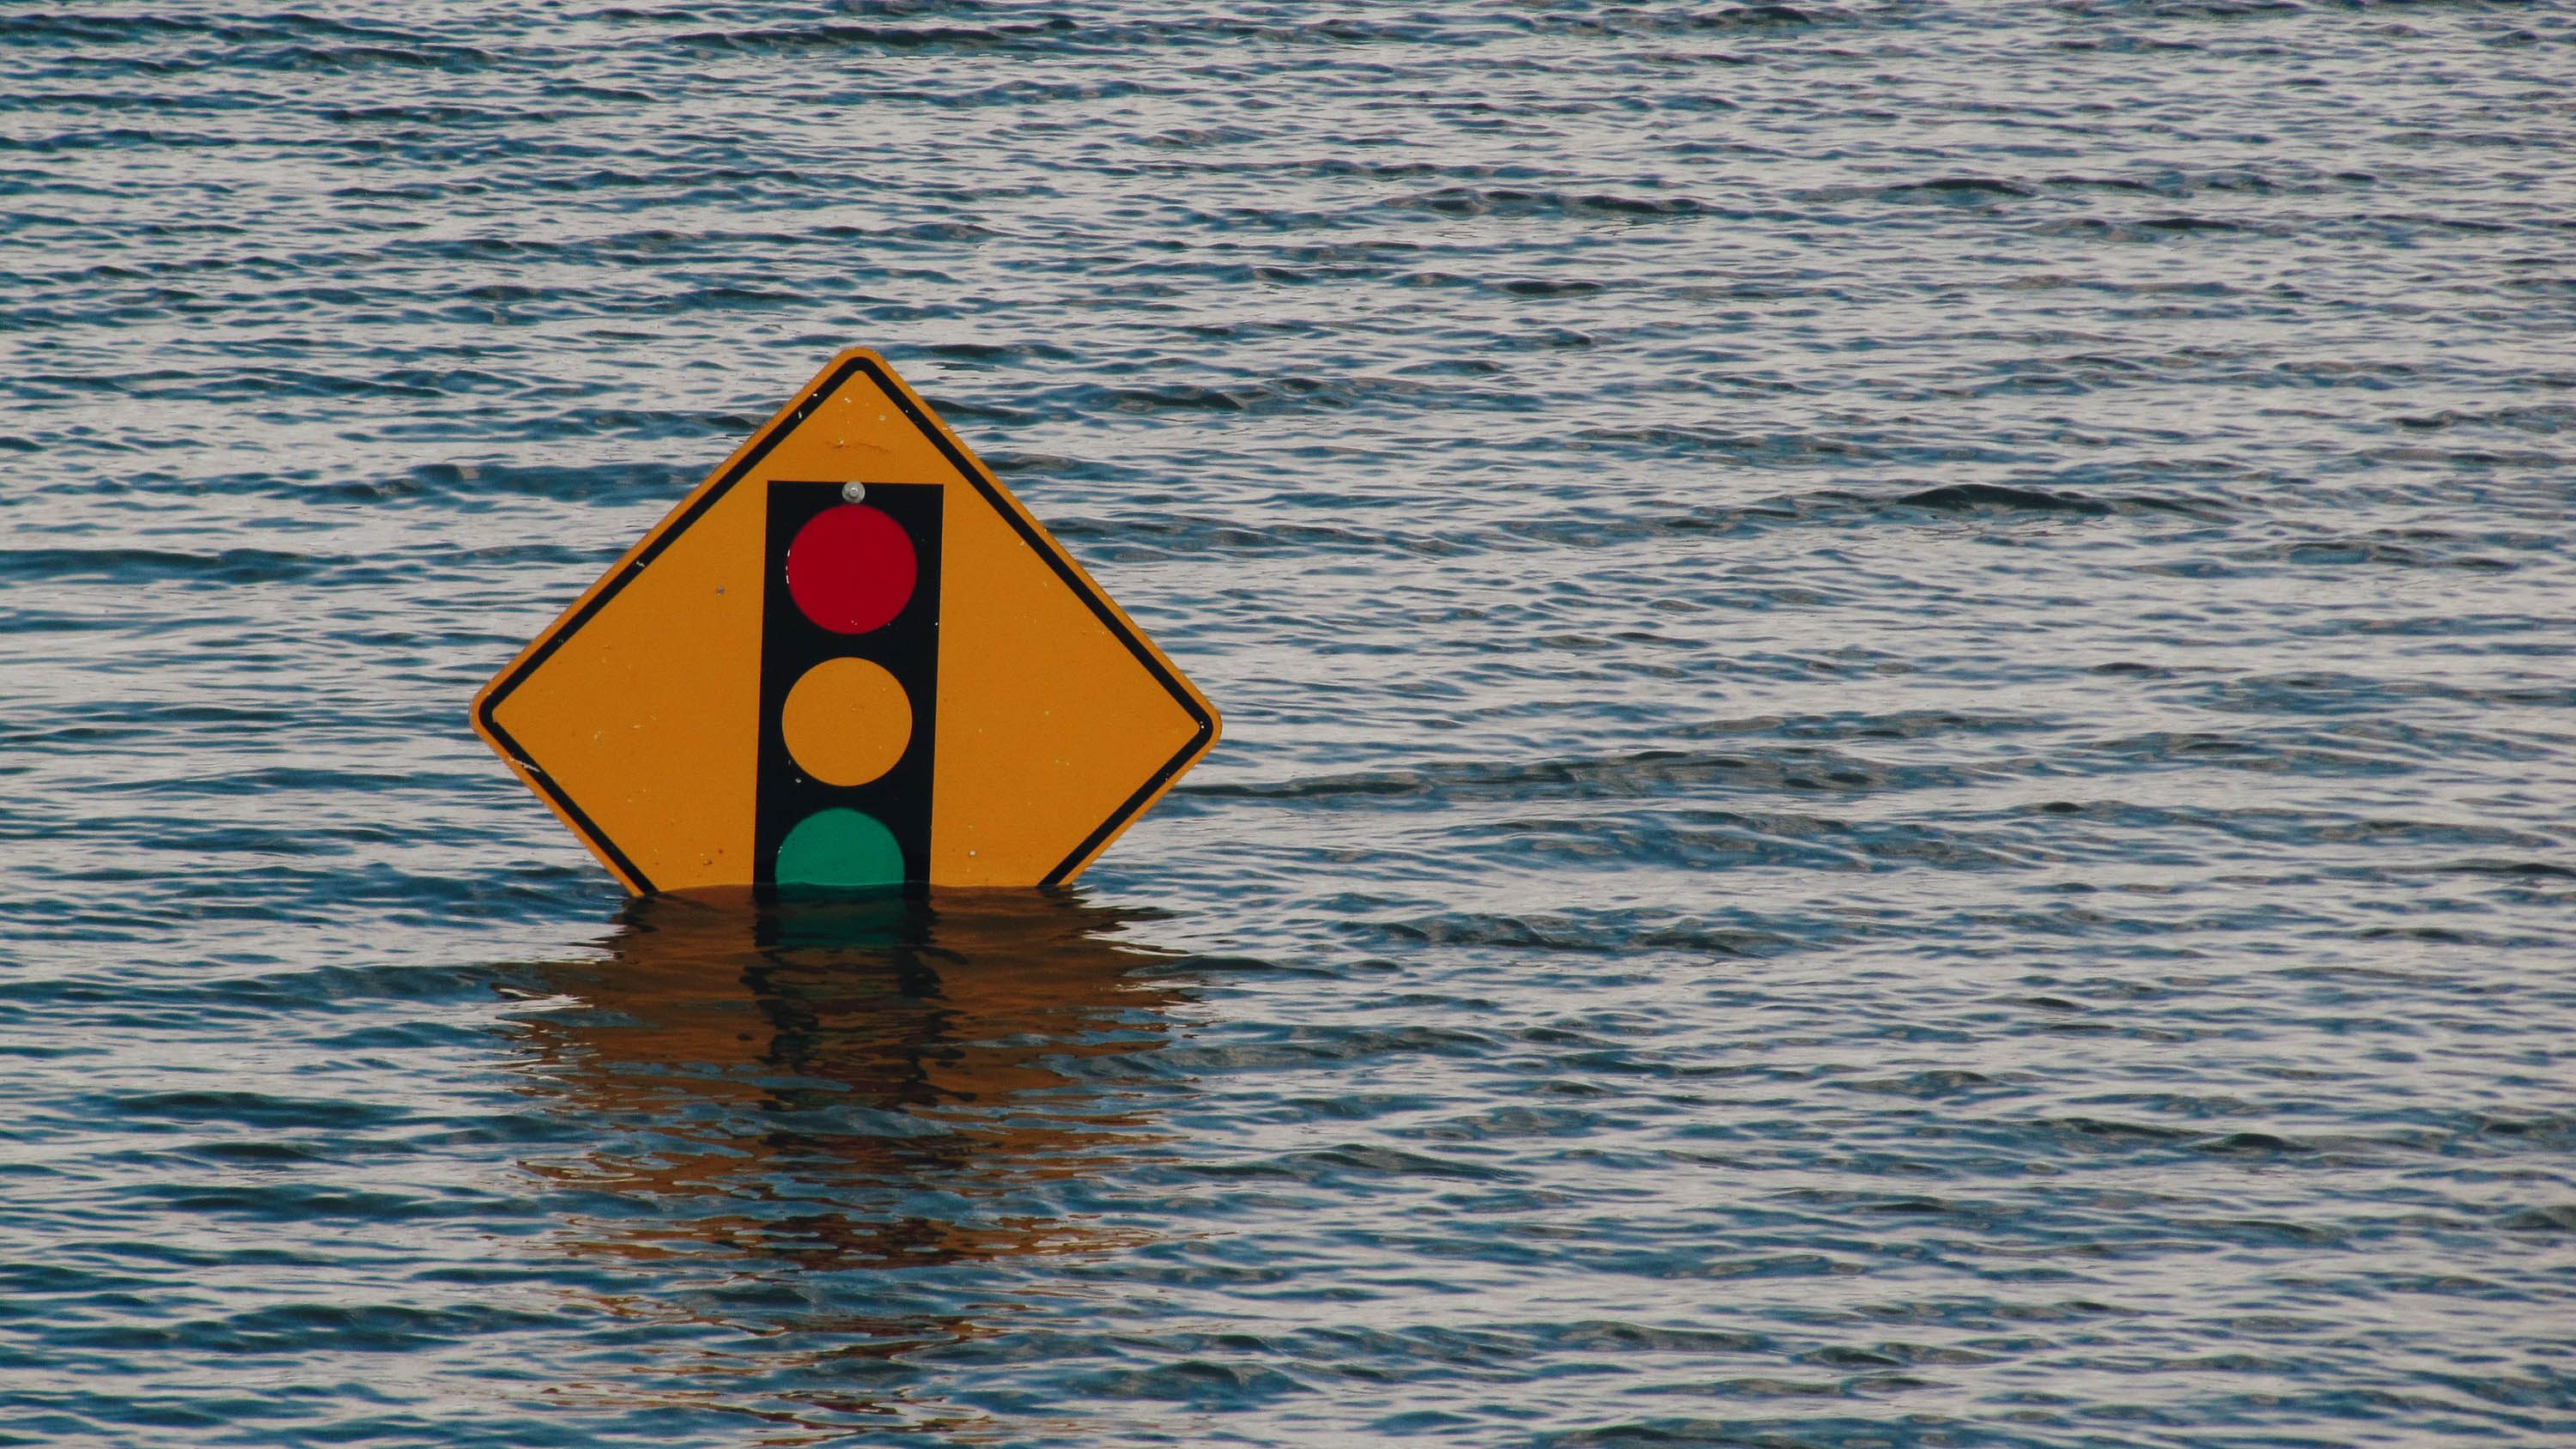 Flood waters partially obscure a road sign depicting a traffic light ahead